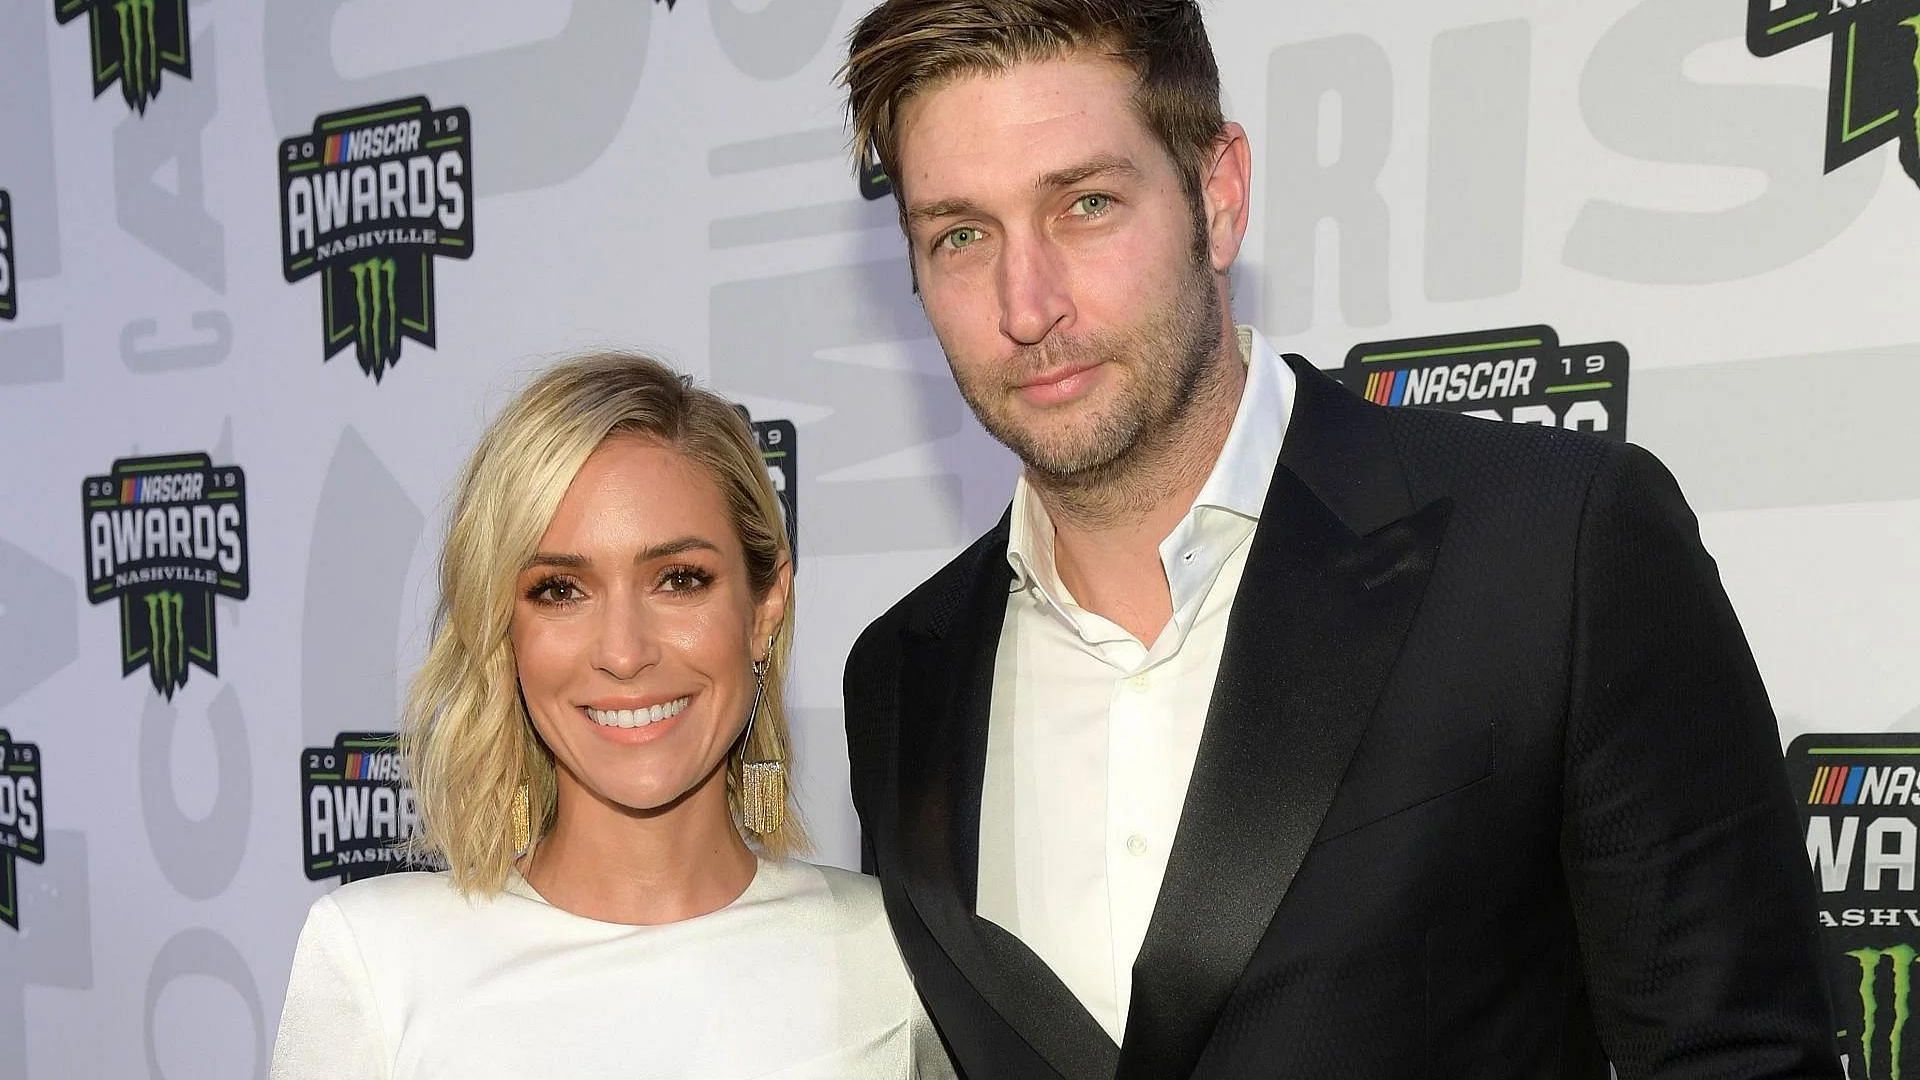 Jay Cutler and Kristin Cavallari were married from 2013 to 2020.